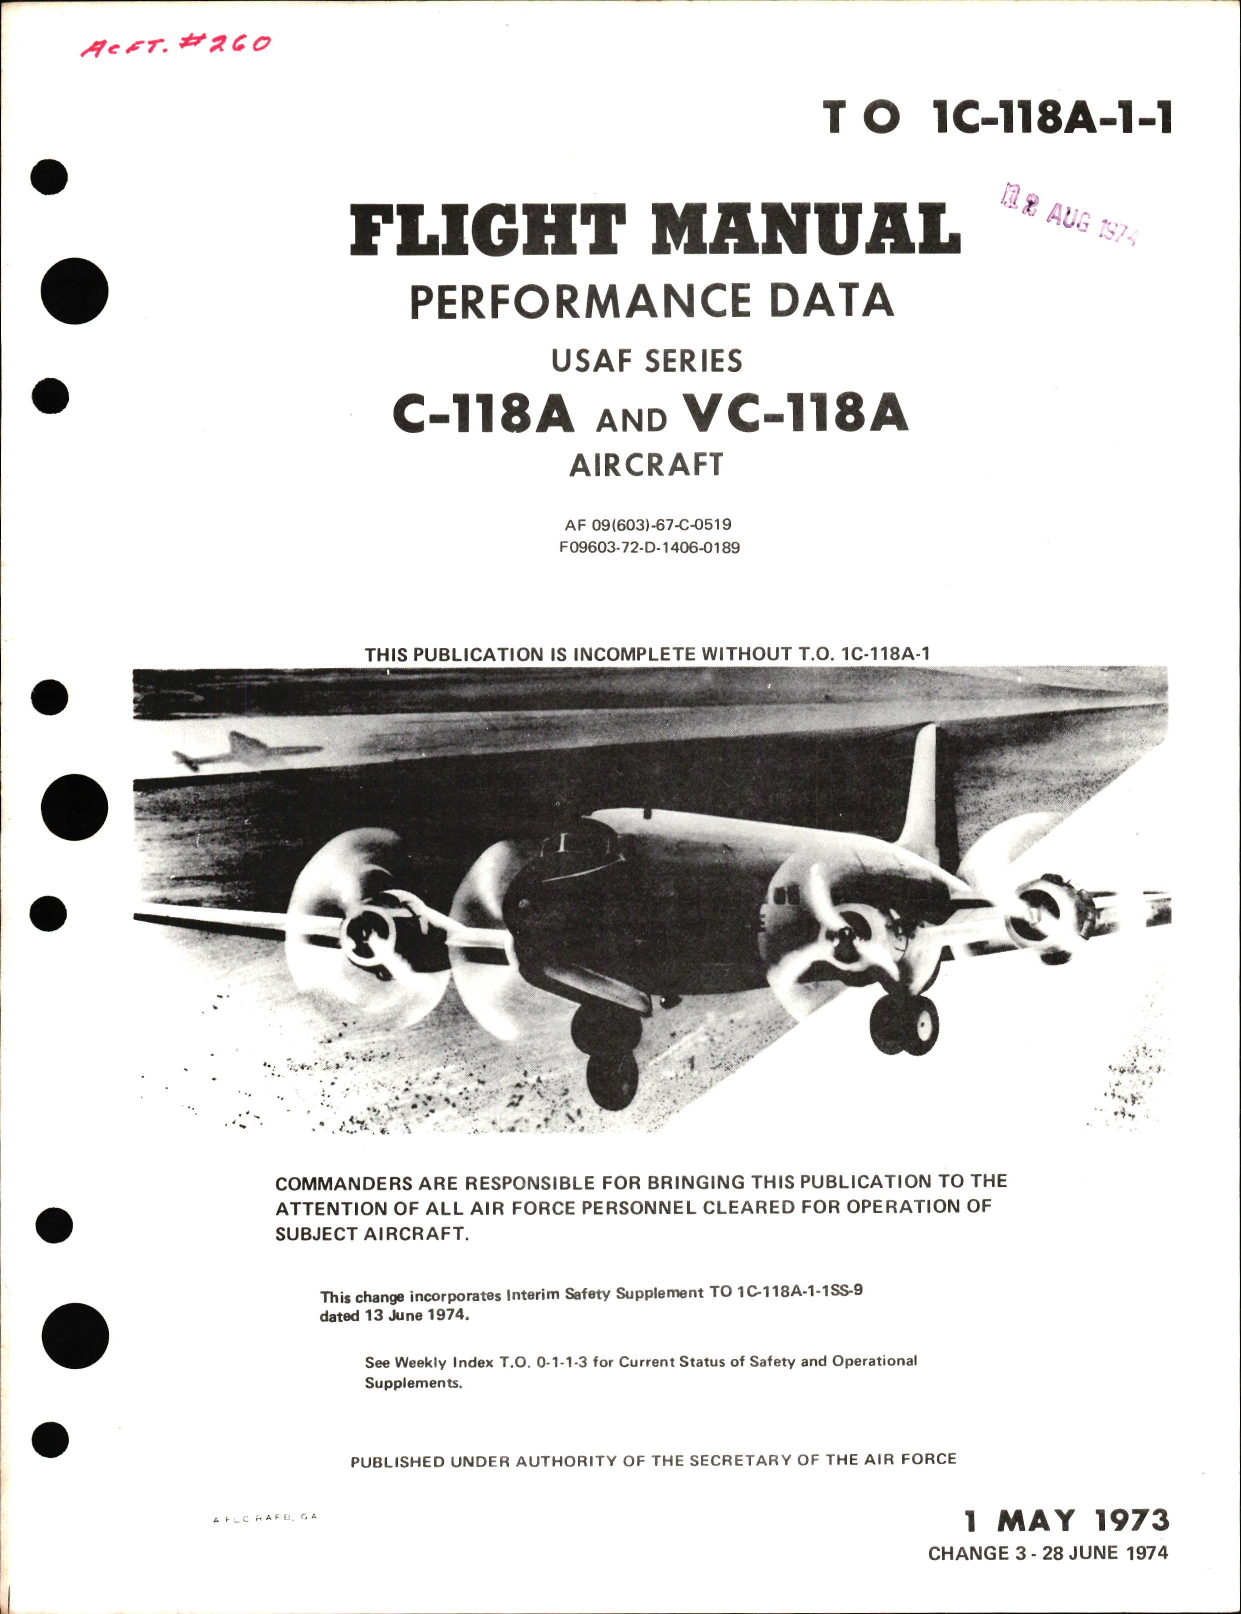 Sample page 1 from AirCorps Library document: Flight Manual Performance Data for C-118A and VC-118A